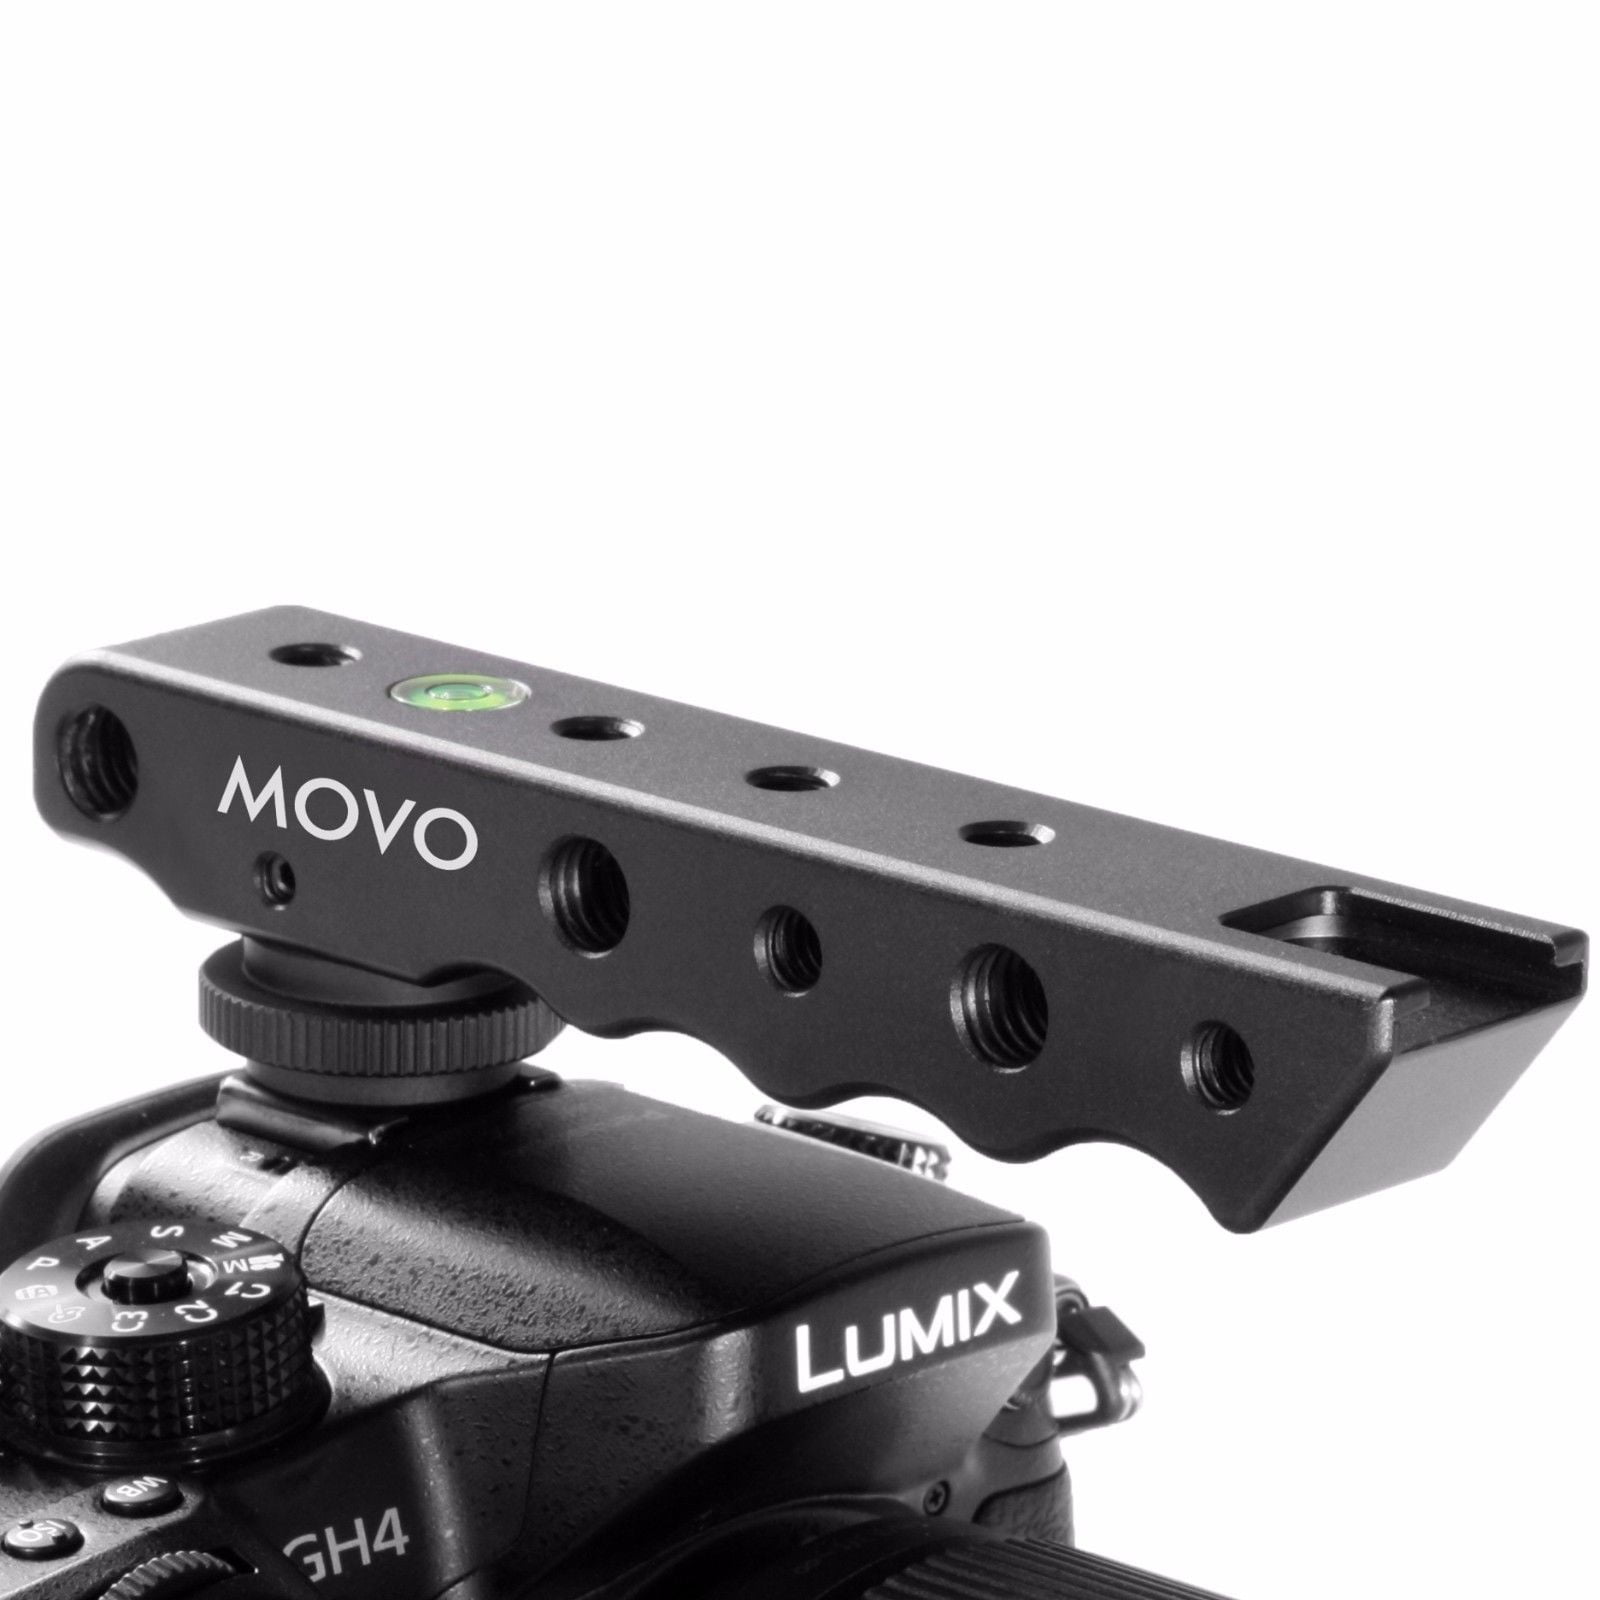 Olympus & Pentax DSLR Cameras Video Light Camera Monitor Video Stabilizing Top Handle & Cold Shoe Extender for Canon EOS Nikon